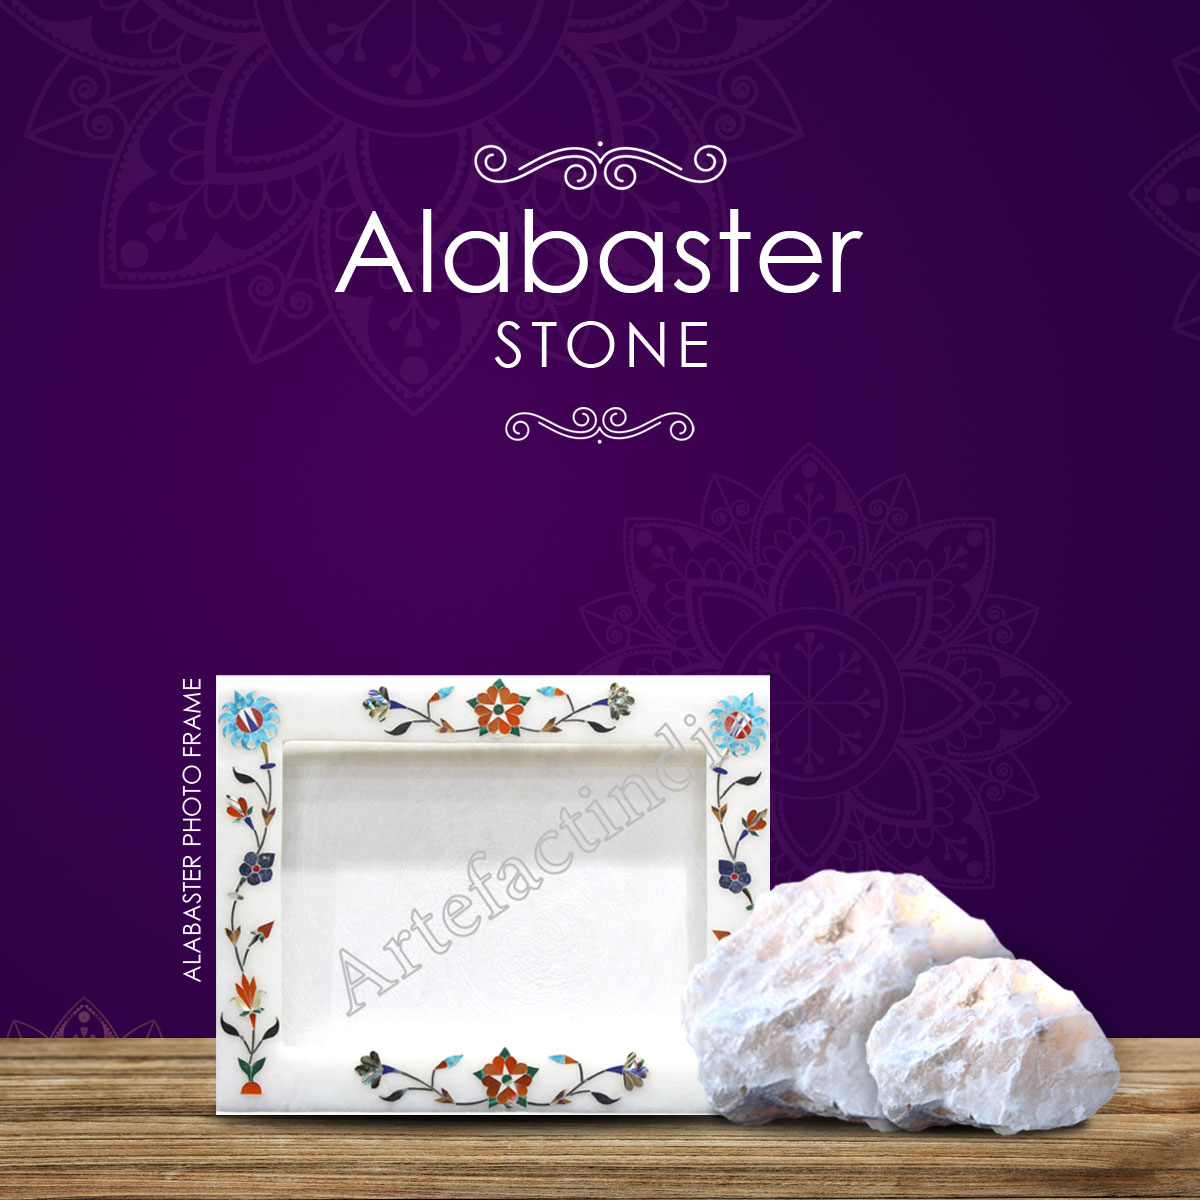 The Alabaster Stone